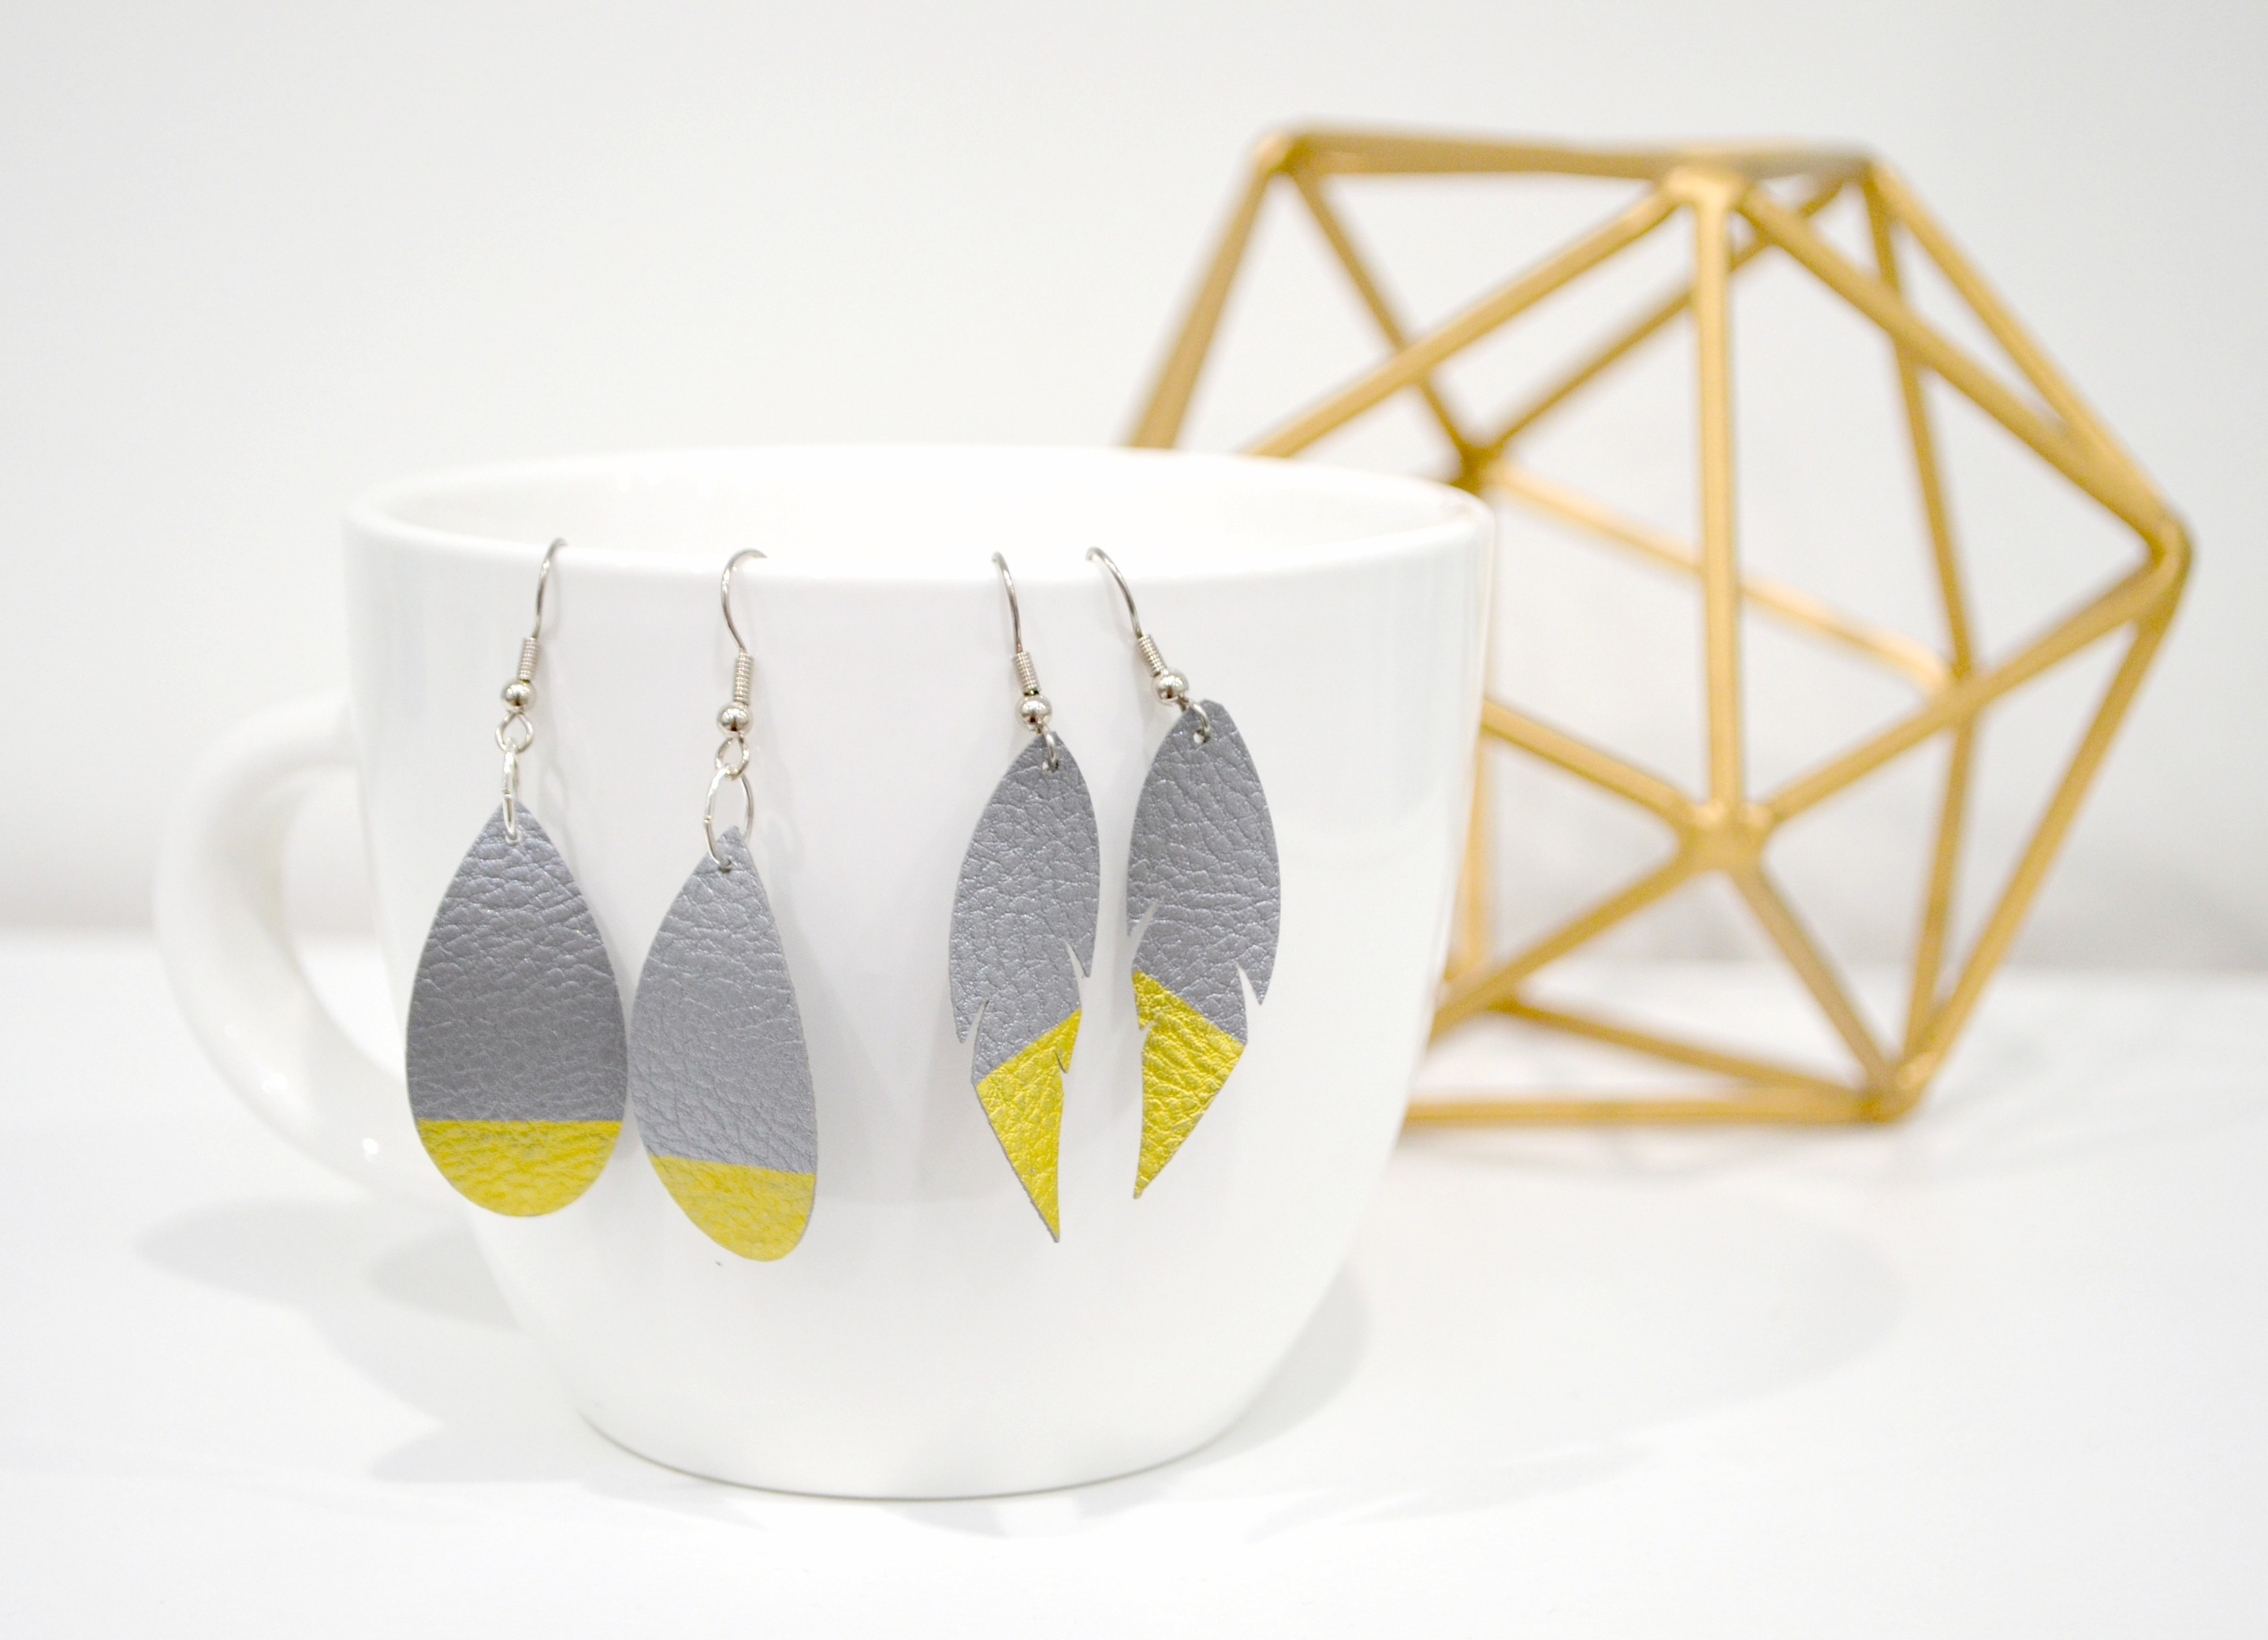 How to make leather earrings with your Cricut - Weekend Craft